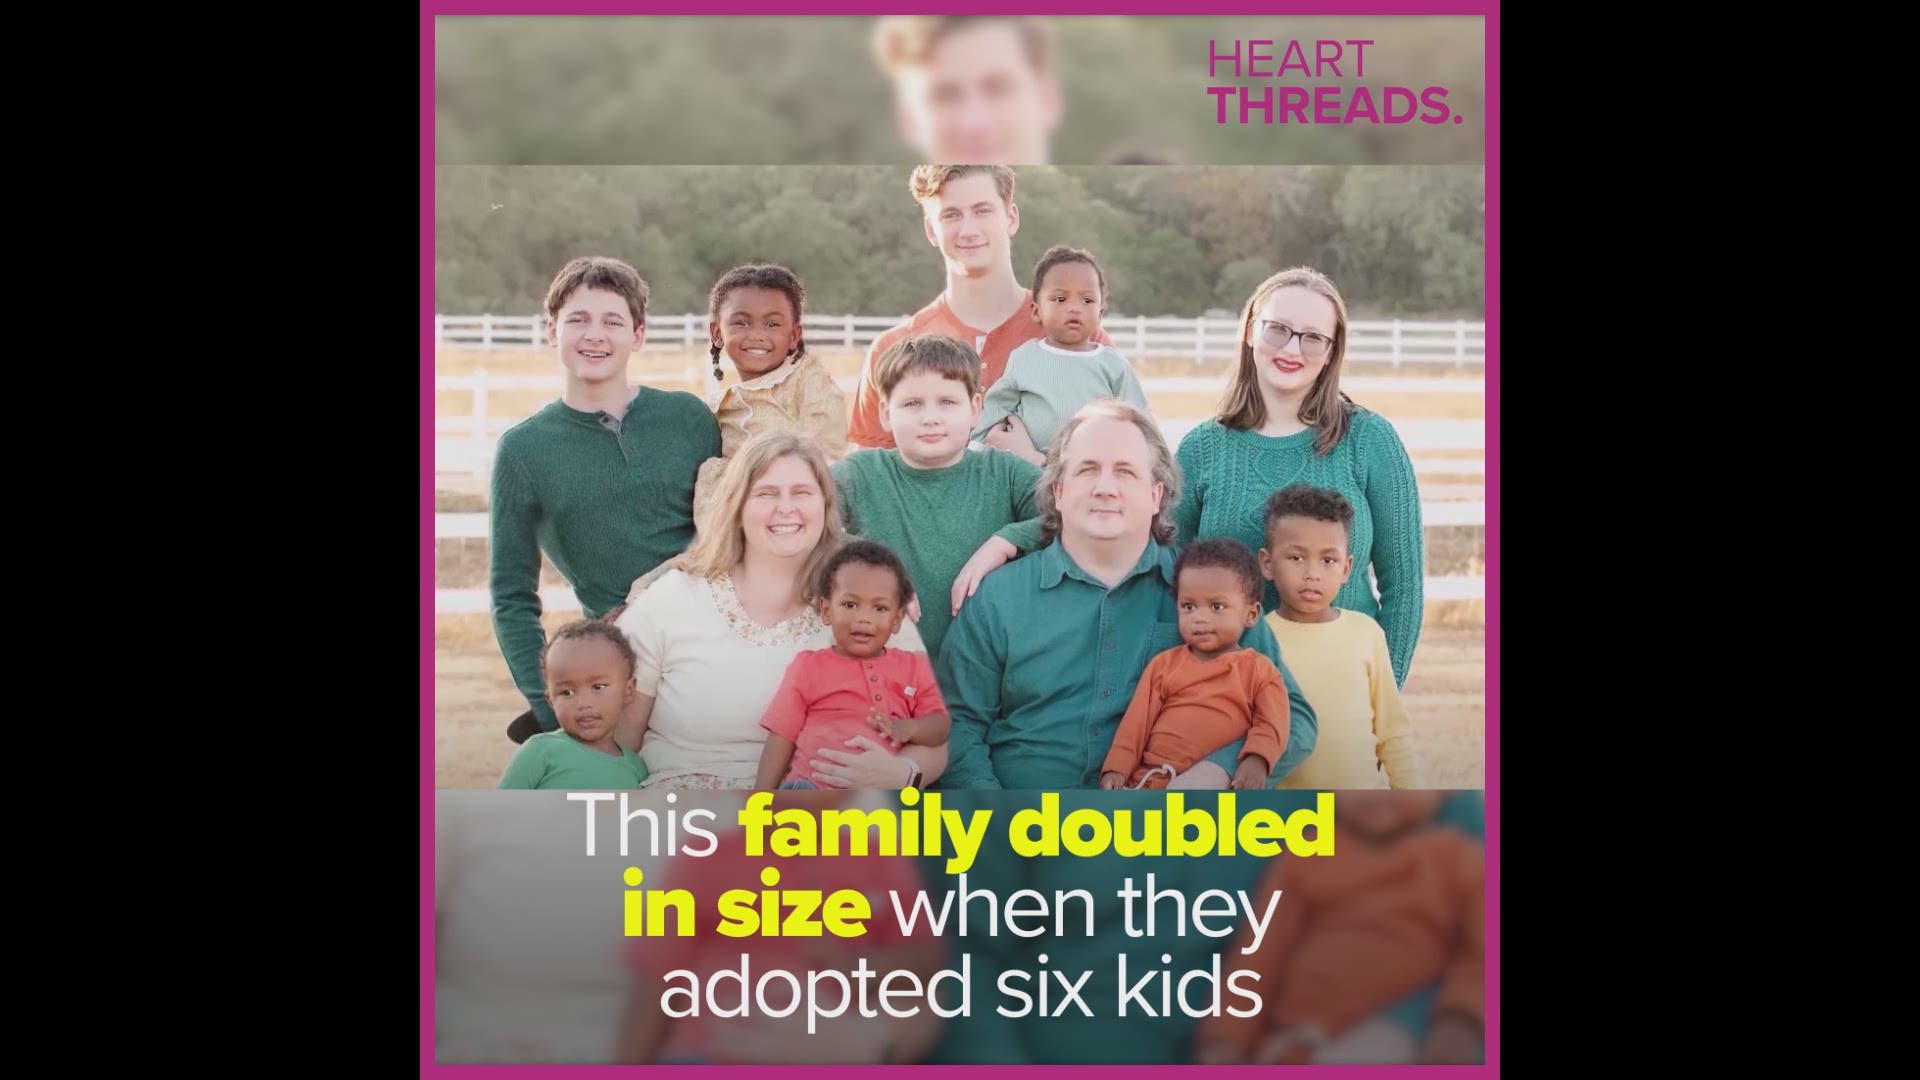 This family 'doubled their flock' when they adopted six kids.